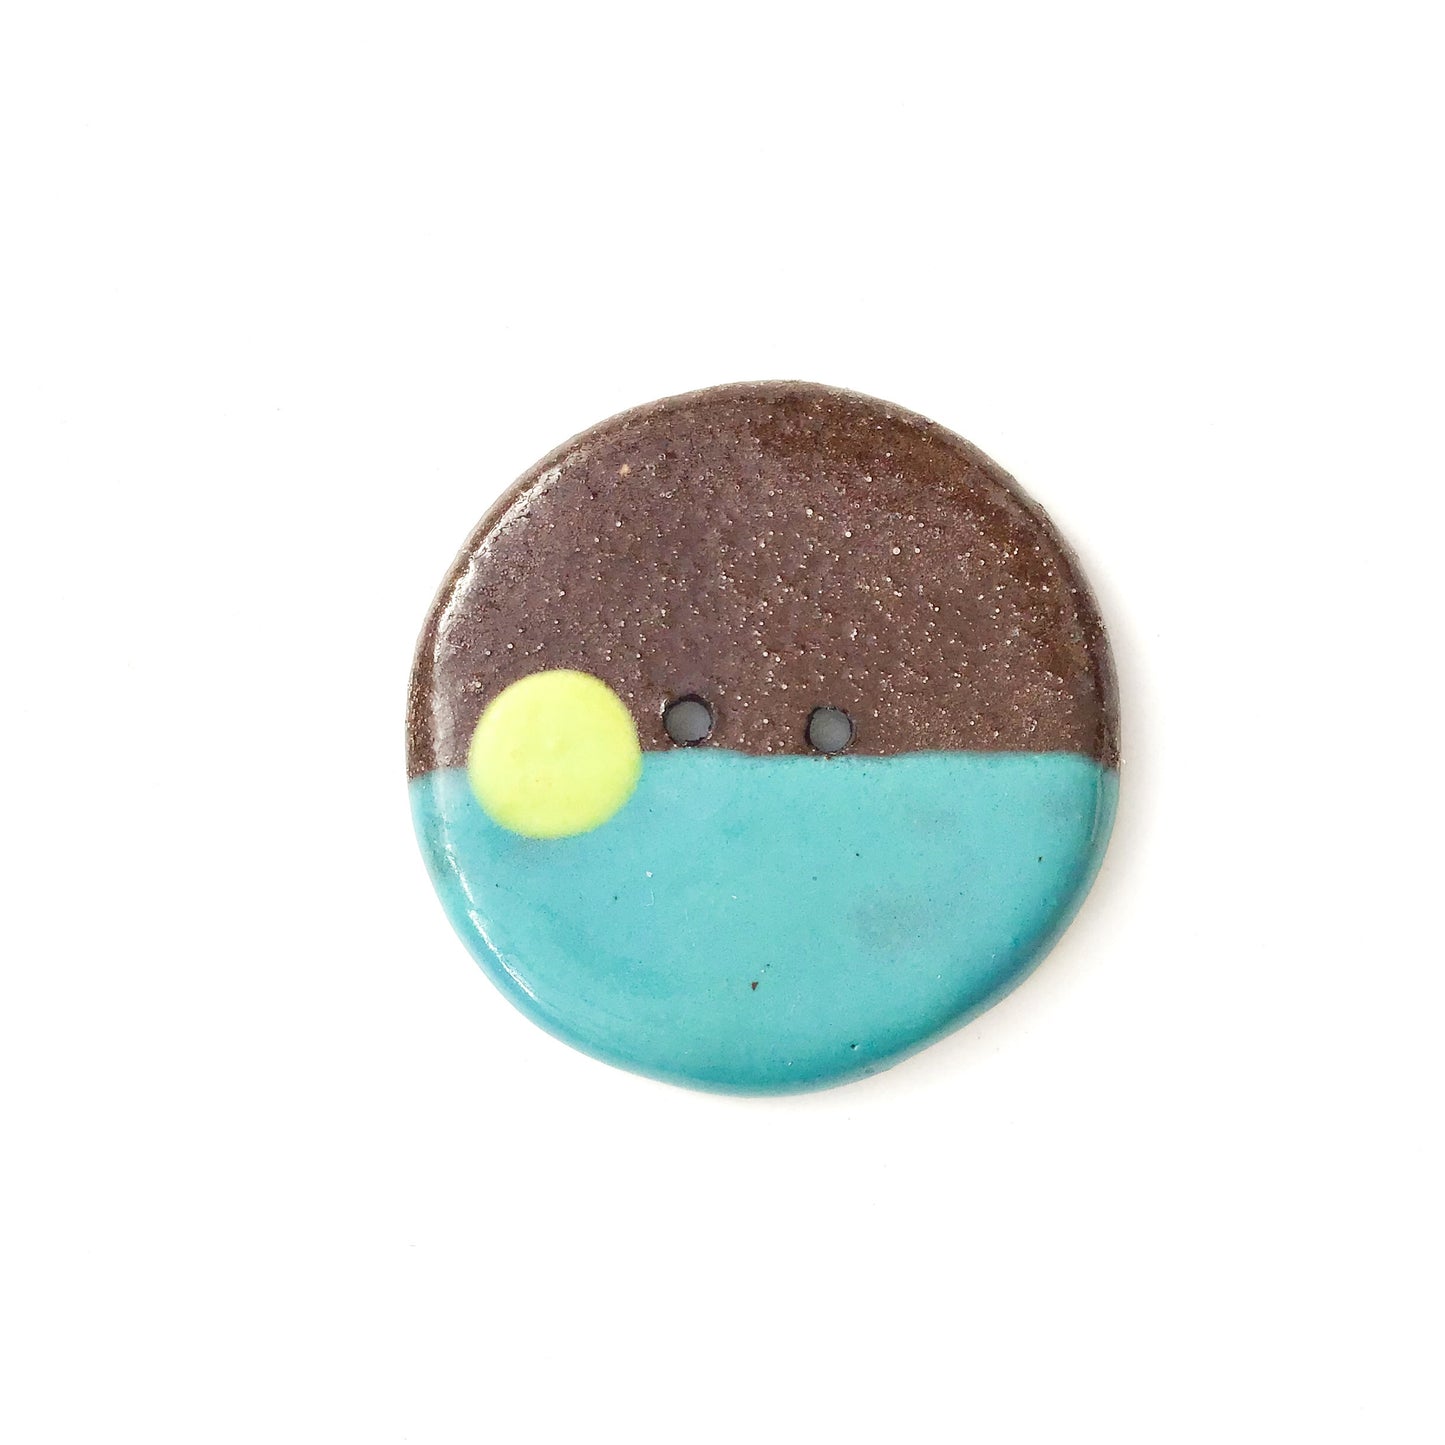 Colorful Horizons - Contemporary Ceramic Buttons - 1 3/8"